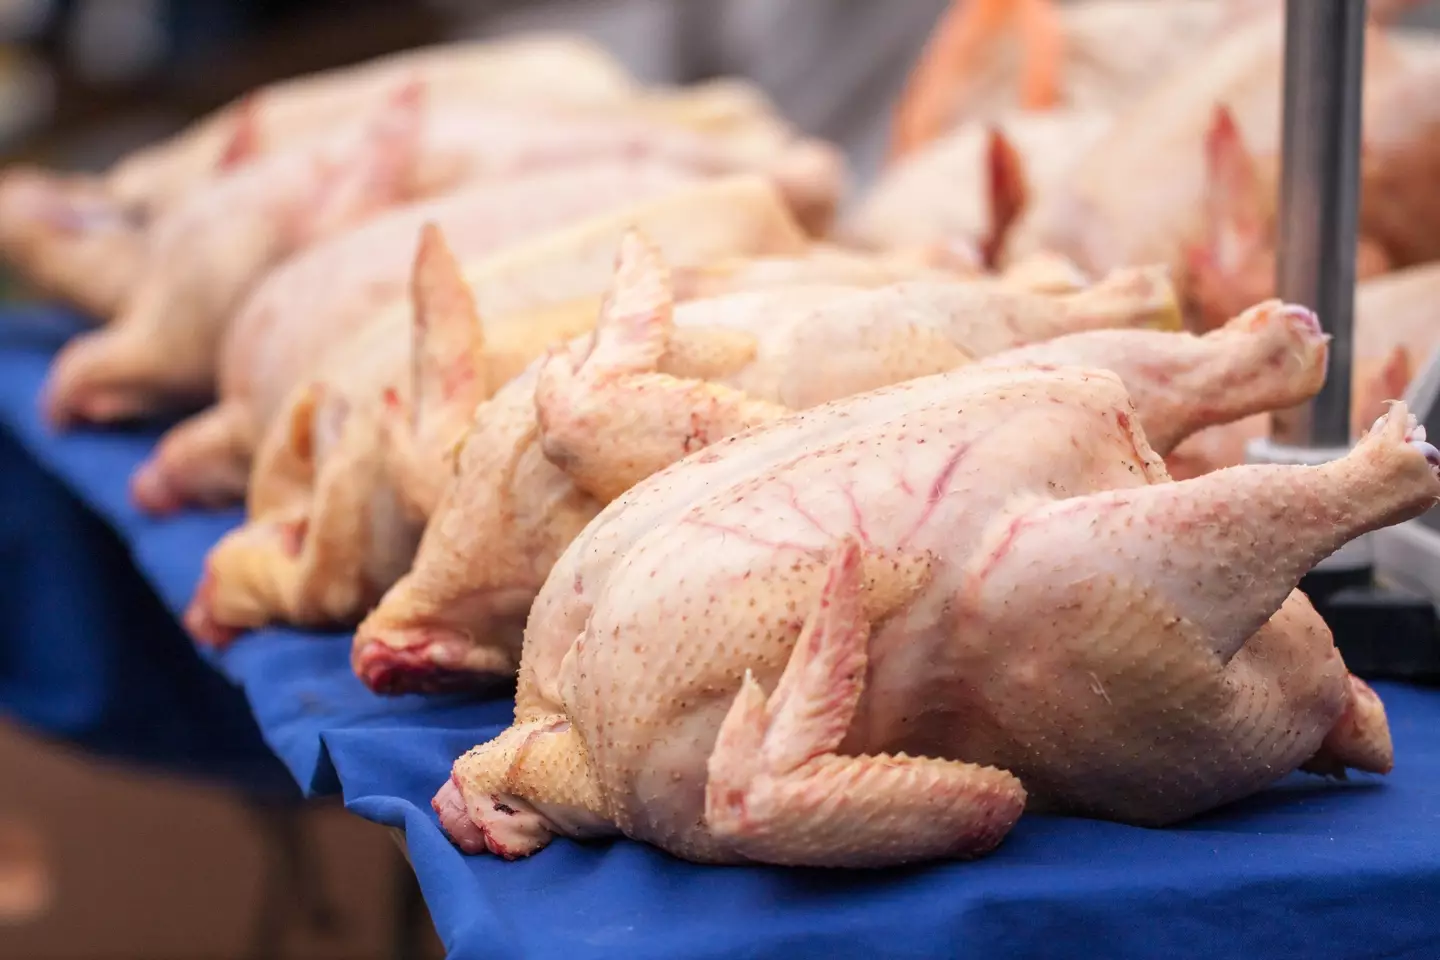 Chicken is rising faster in price than any other protein.